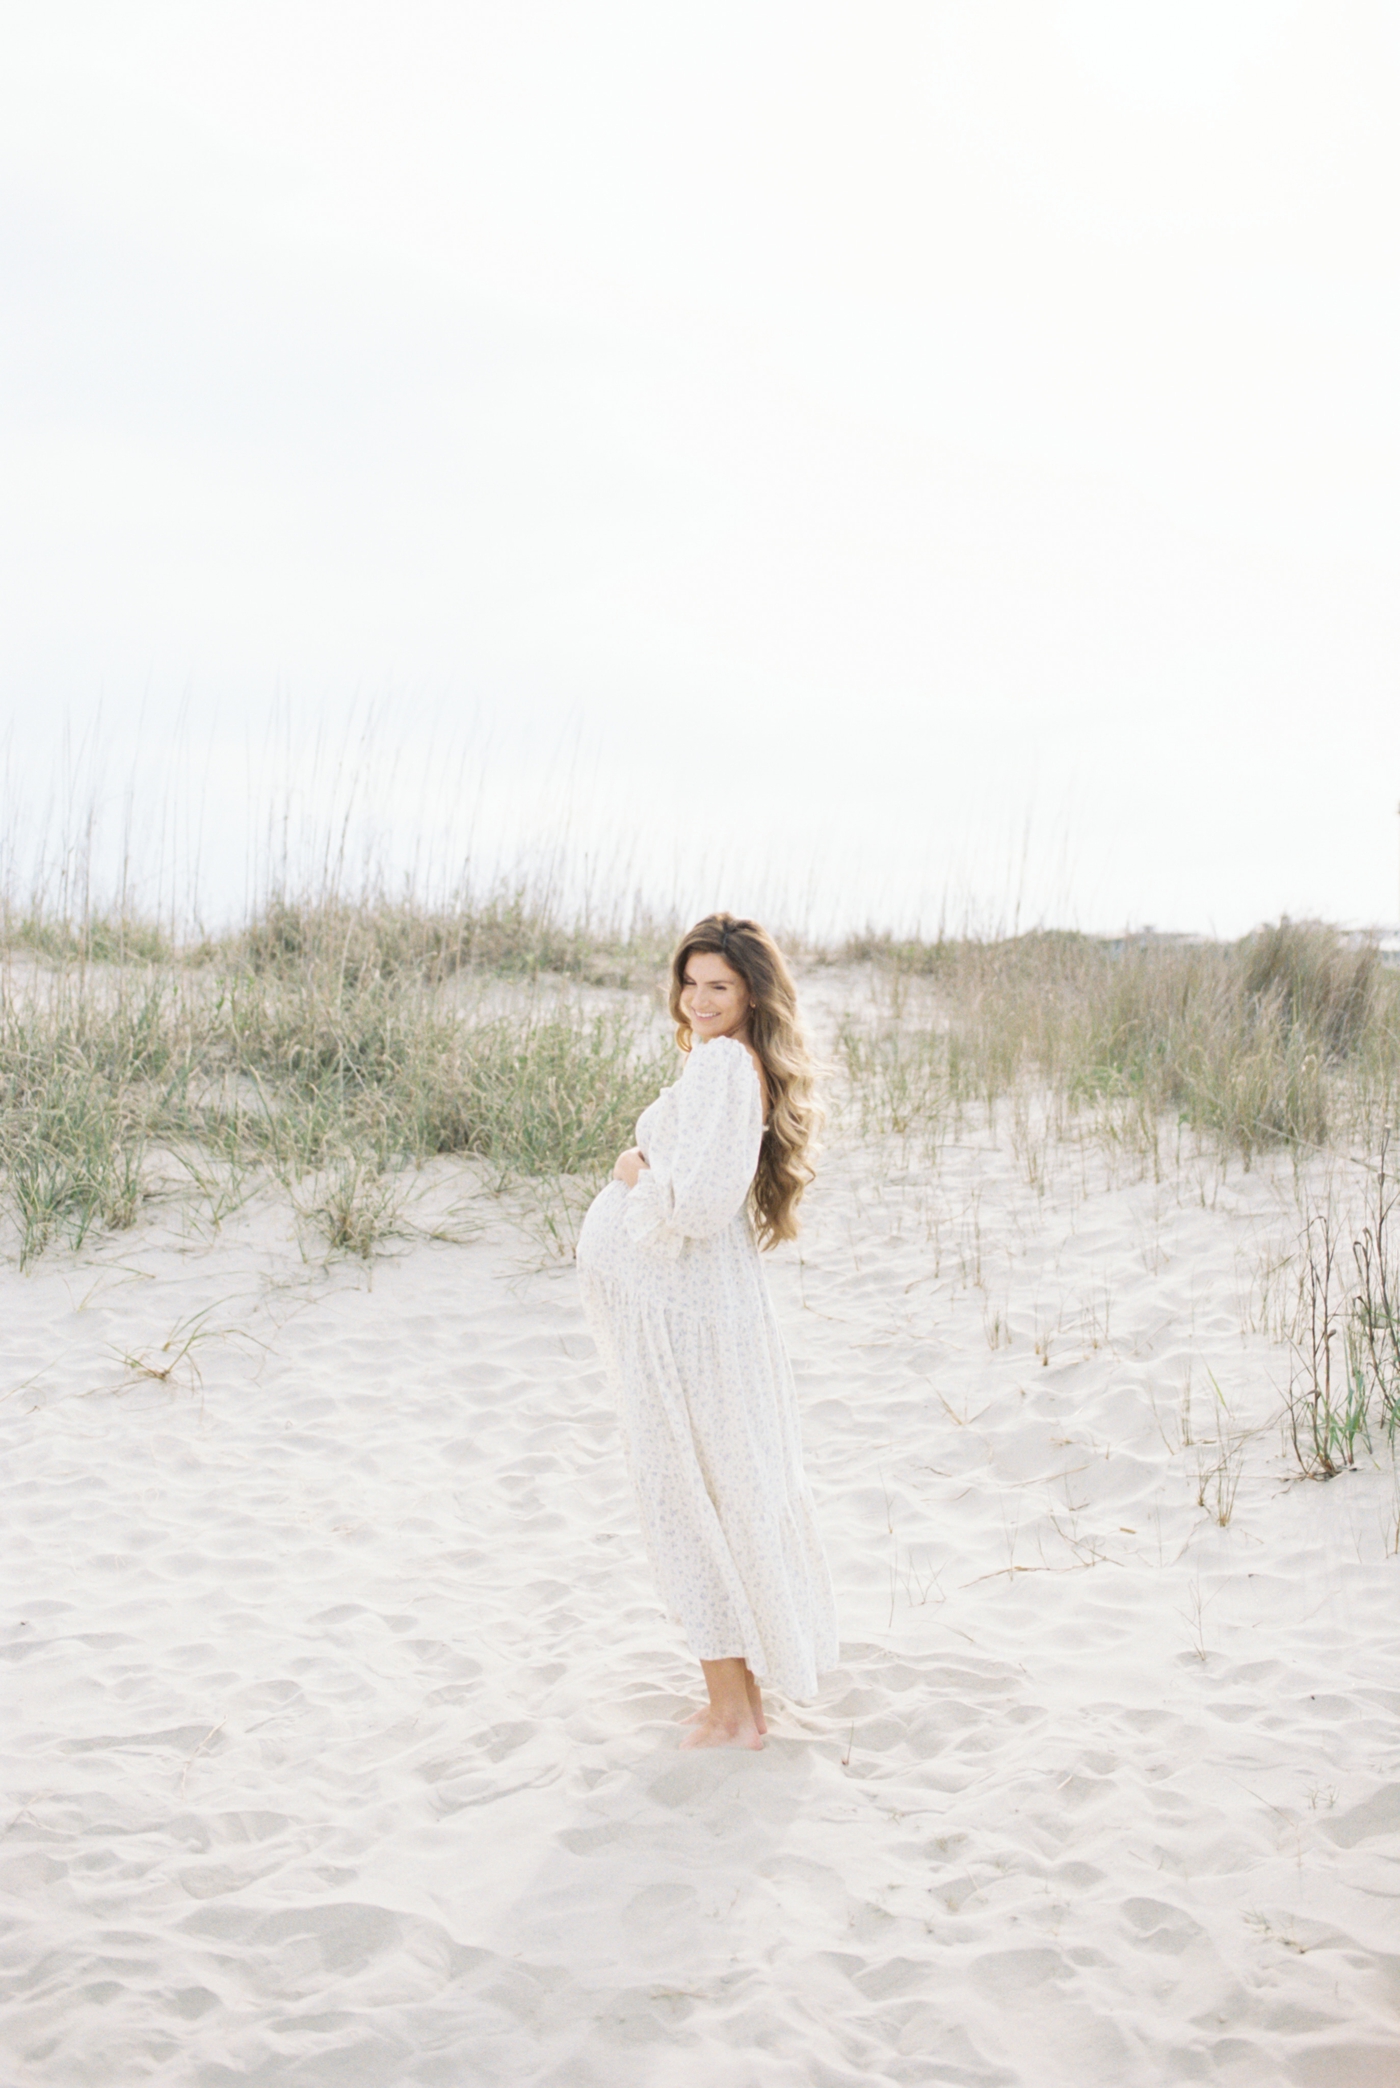 Pregnant woman in flowy dress on the beach | Photo by Caitlyn Motycka Photography.